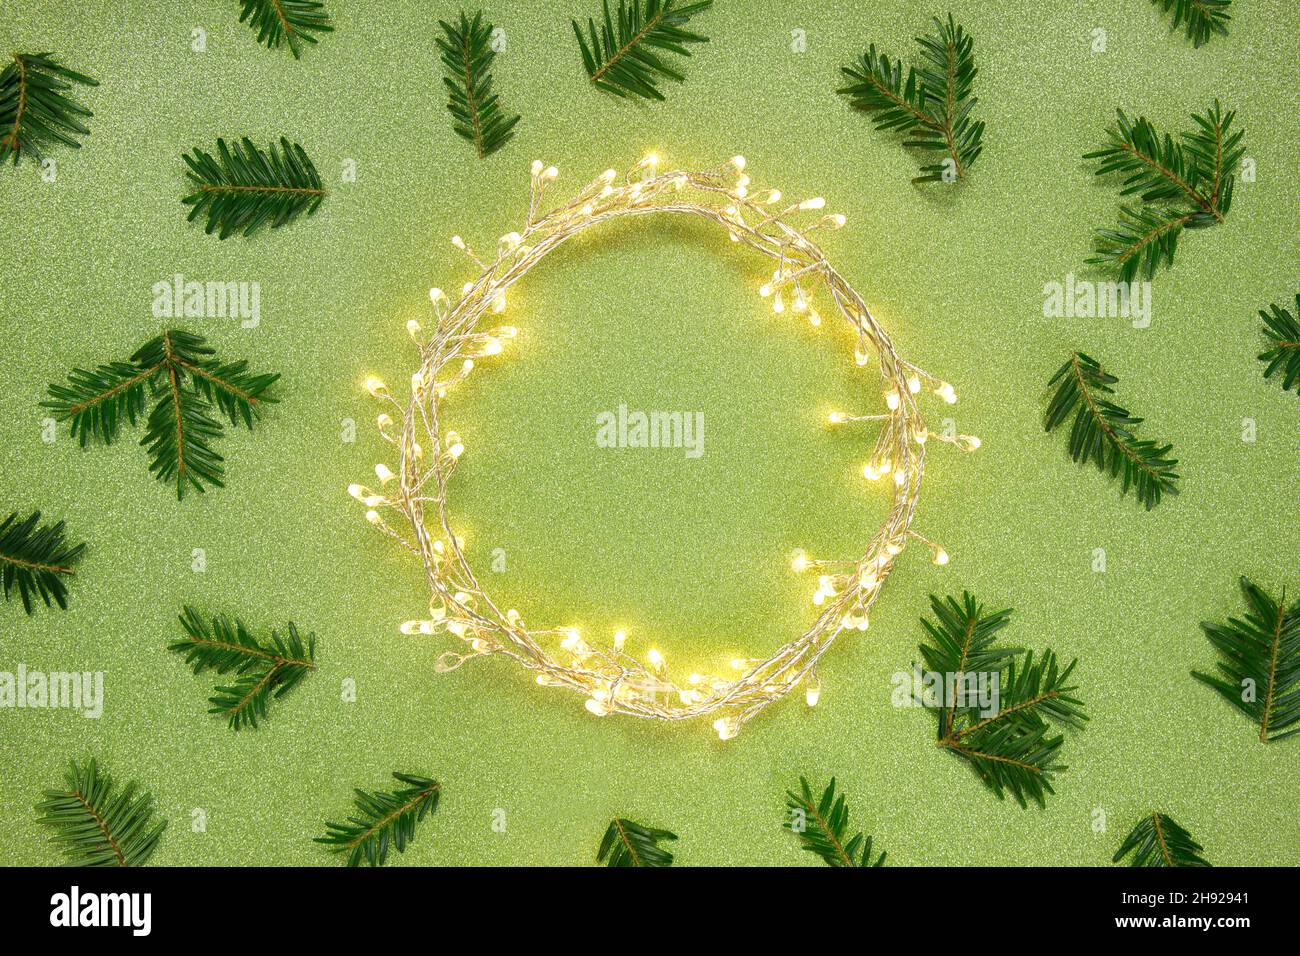 Flat lay top view, Christmas background circle shape border frame, light garland and fir twigs green glitter background. Stock Photo